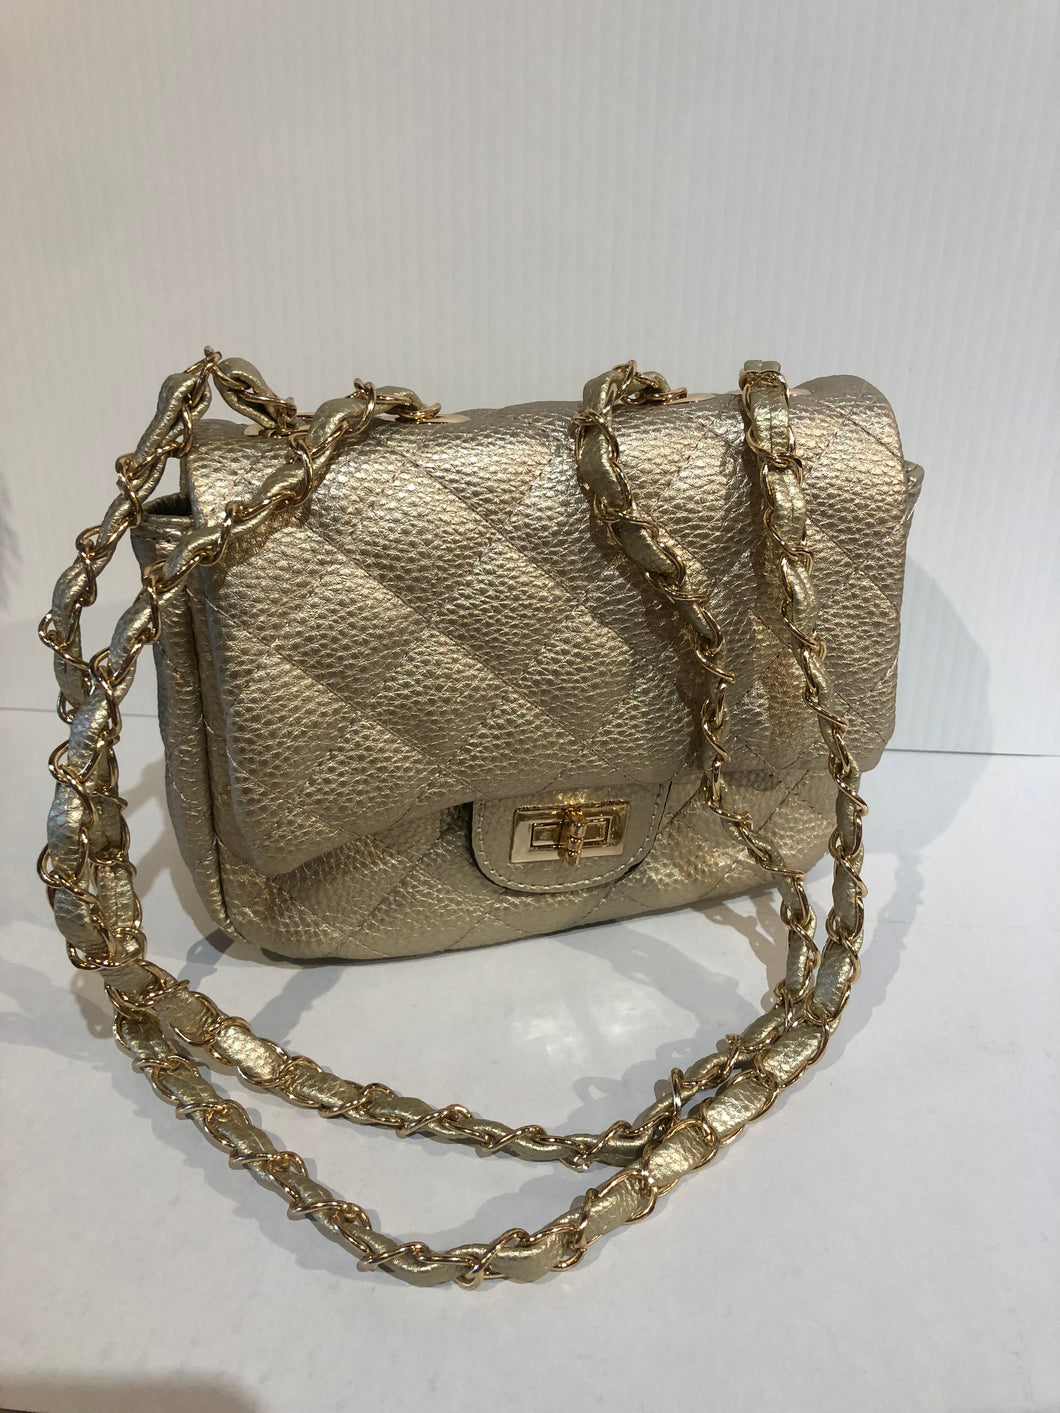 Goldie Gold quilted Handbag with Chain Strap